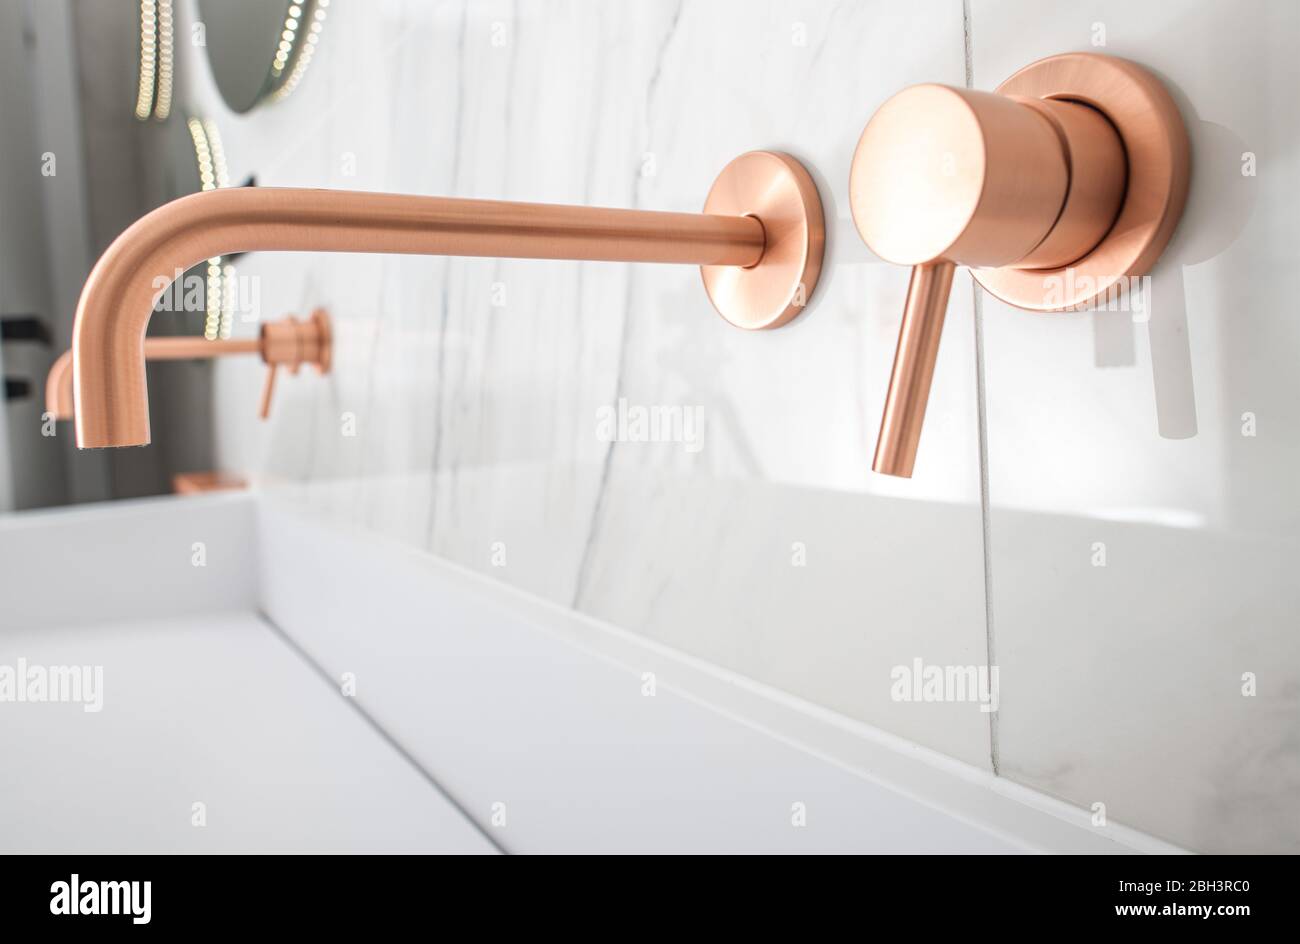 White Porcelain Sink With Copper Faucet, Knob, And Soap Dispenser. Stock Photo